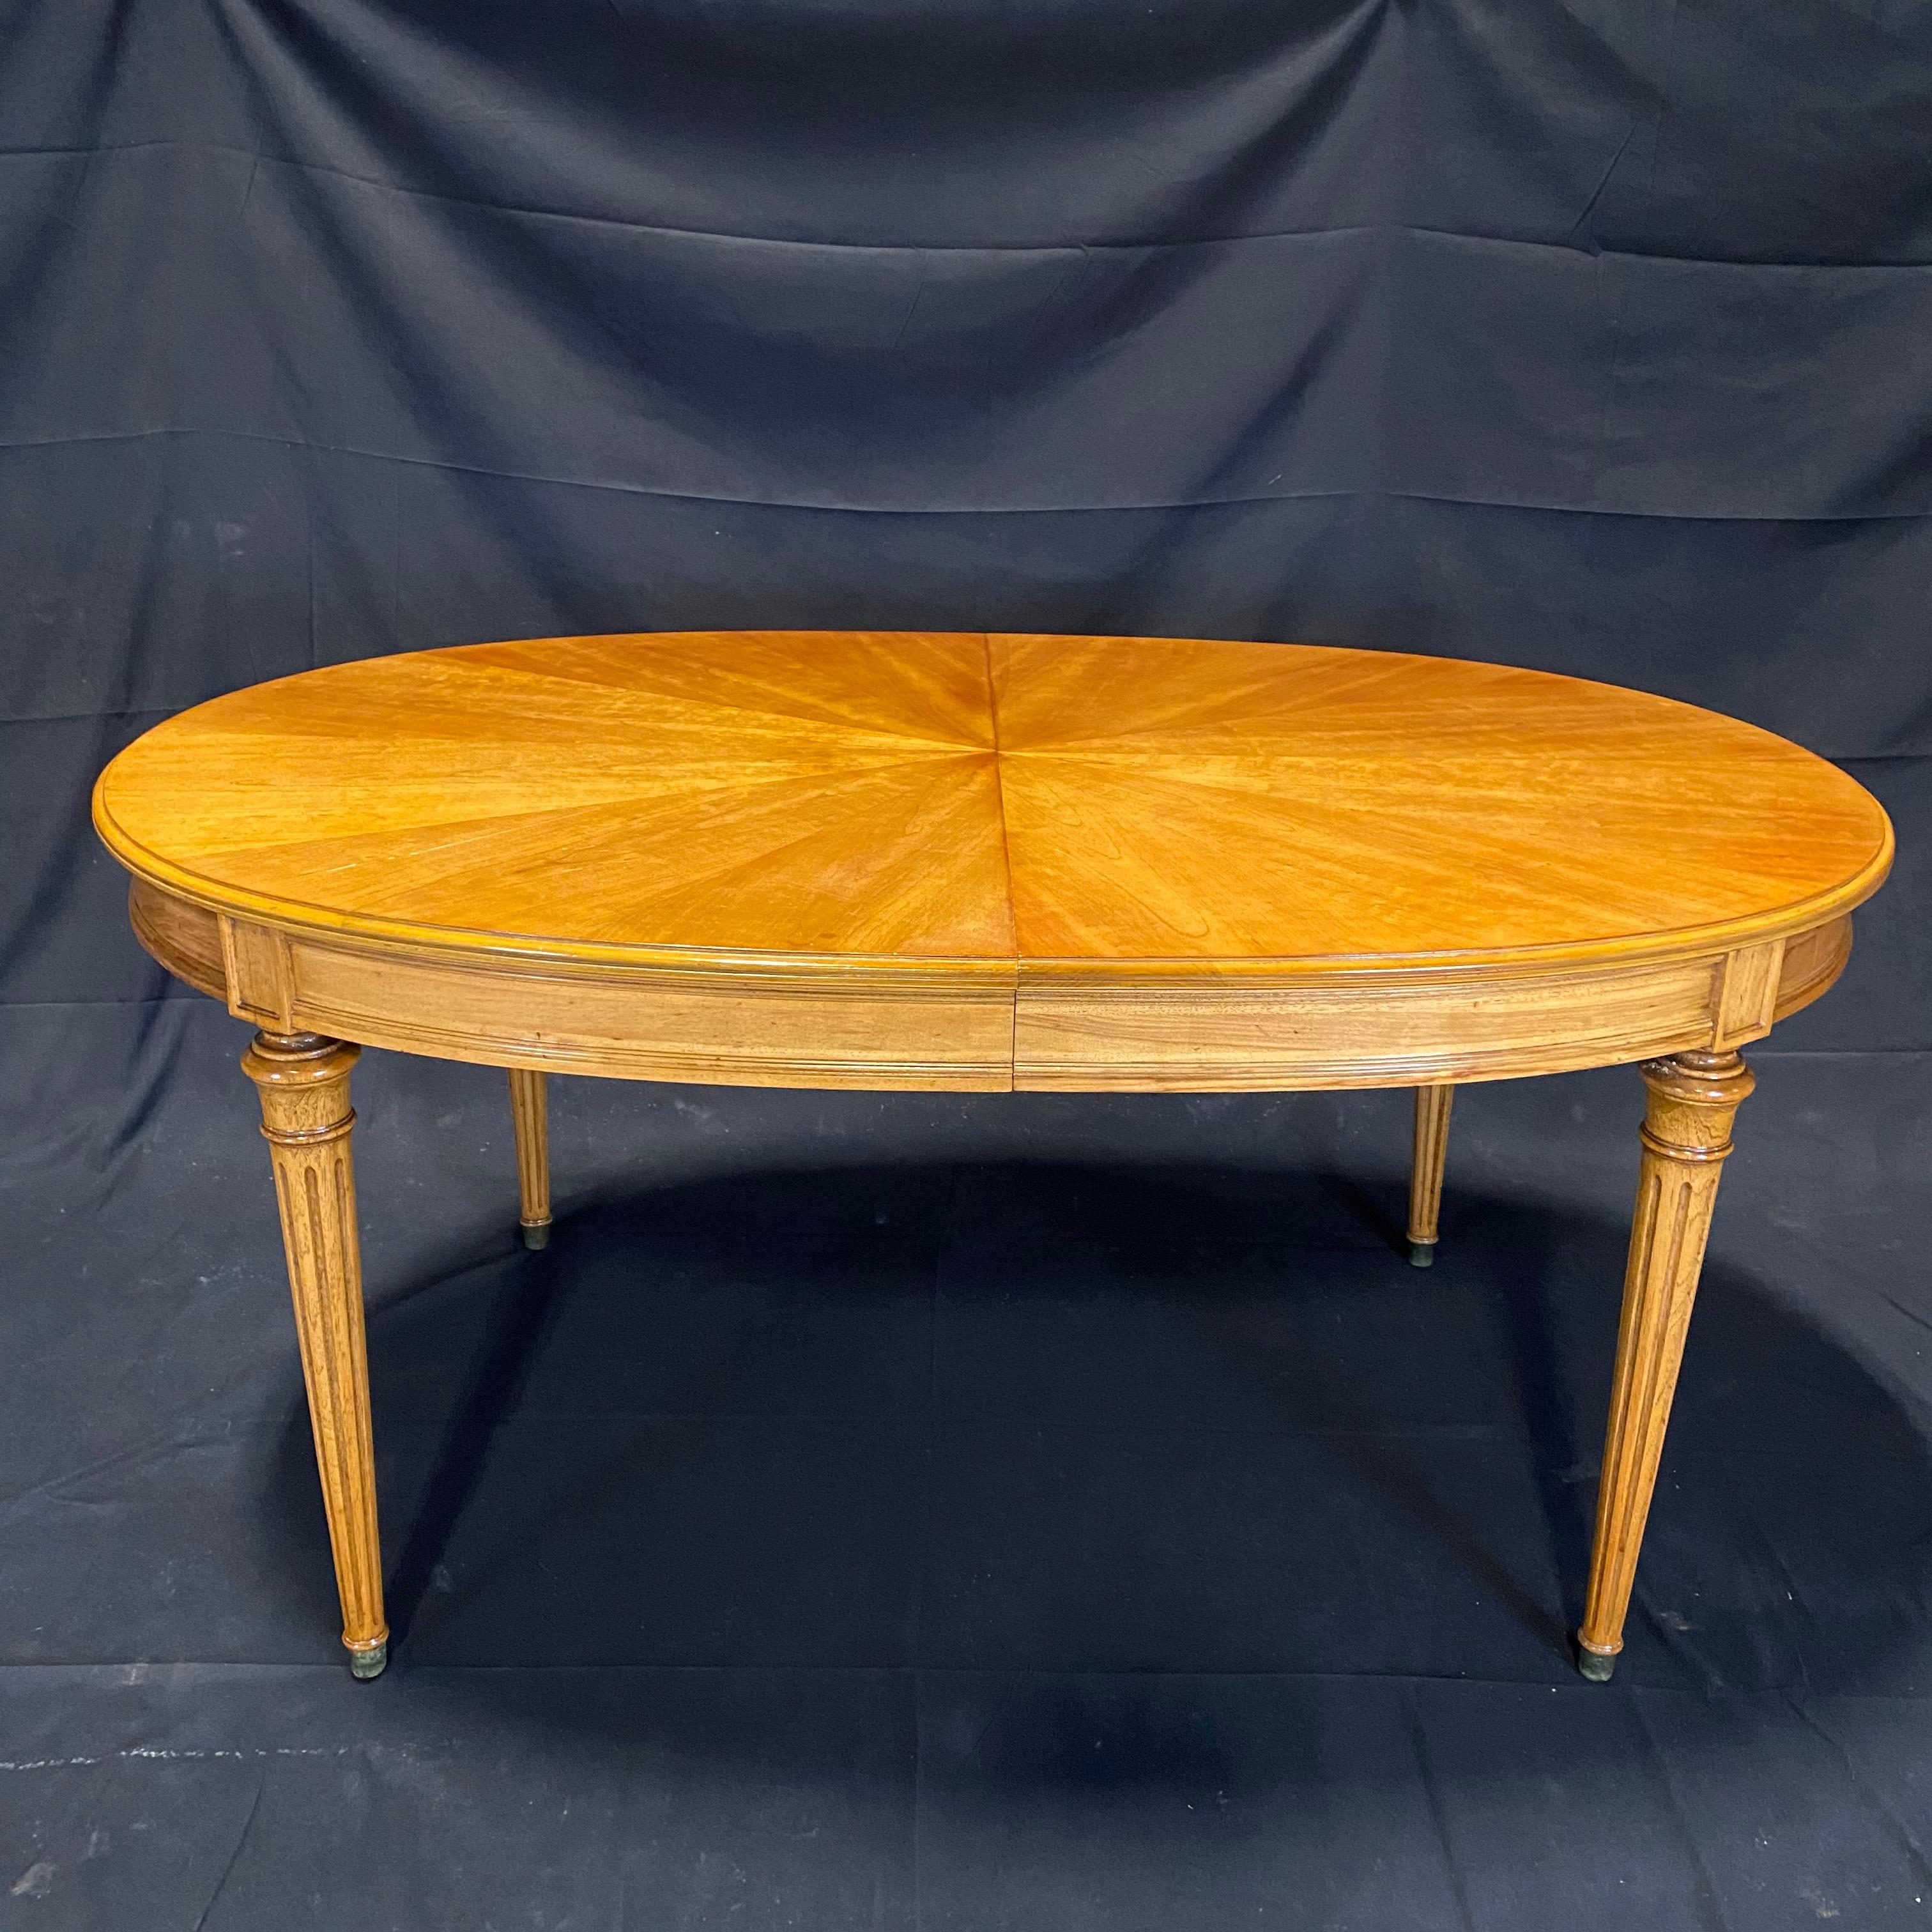 A beautiful Louis XVI style French dining table with sunburst top having a well proportioned oval design that comfortably seats six without the leaves and eight with 2 leaves. The table features a beautiful sunburst veneer to the top and a carved